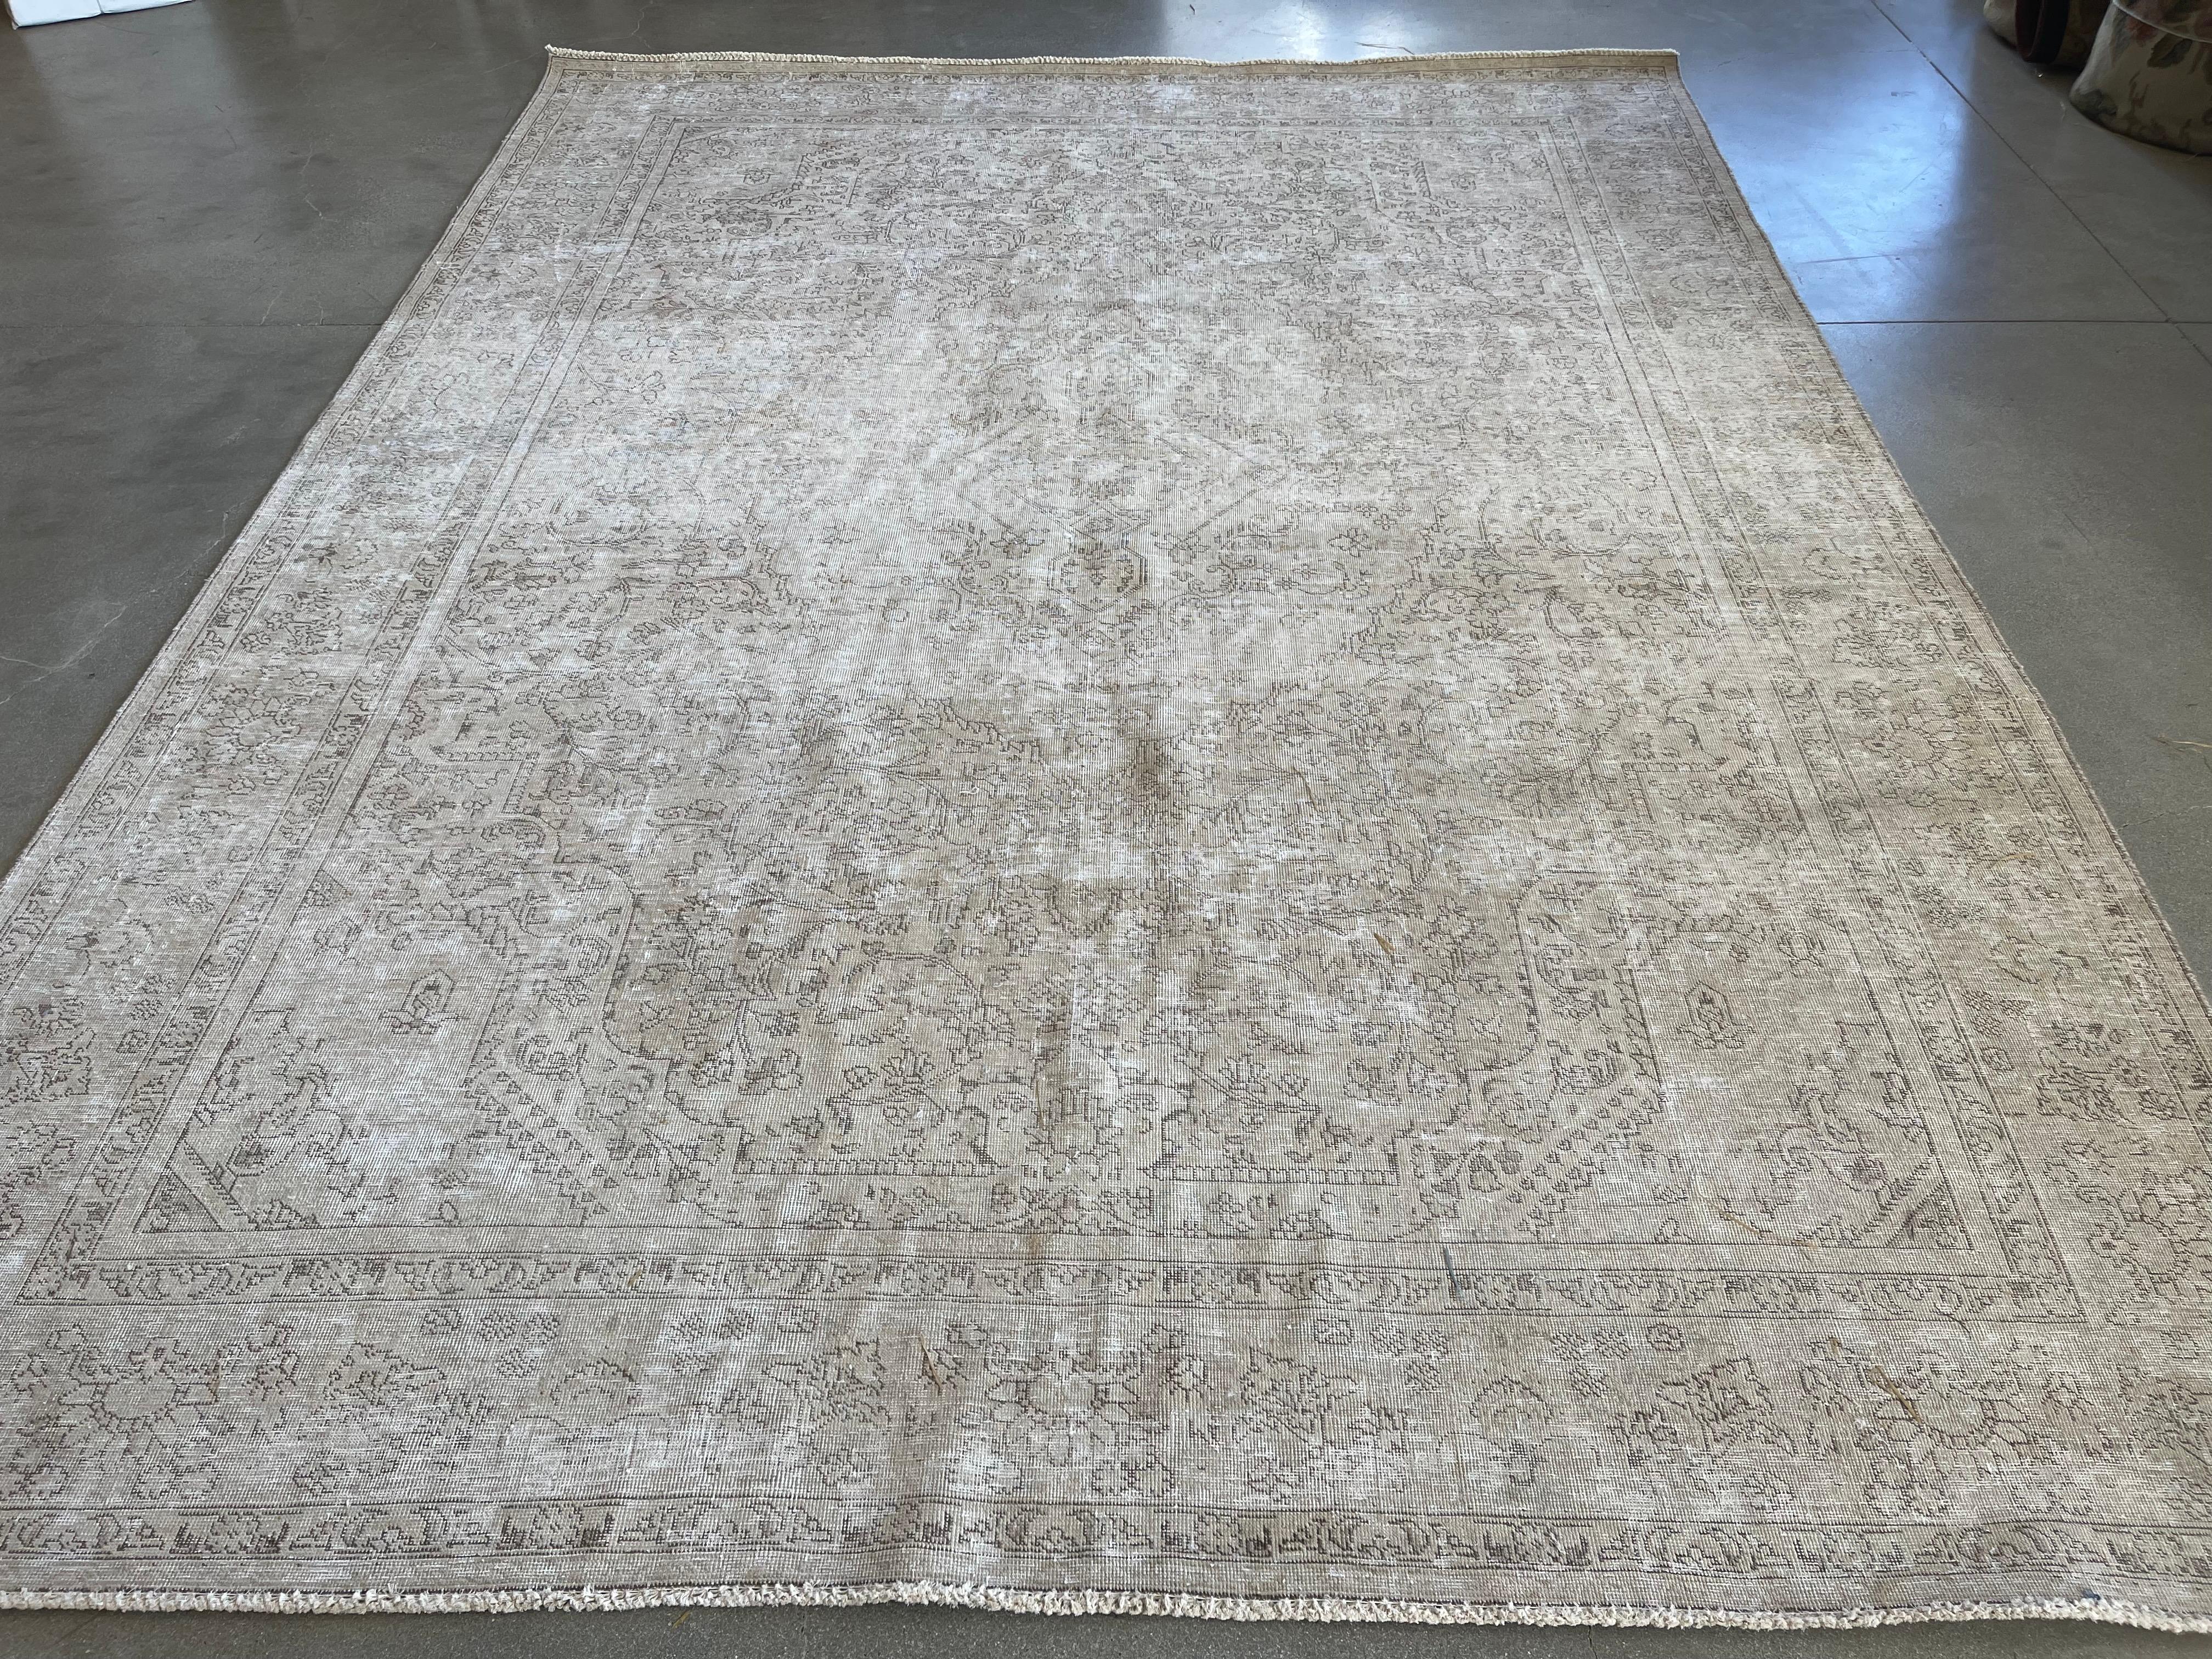 The traditional look receives a modern makeover in this transition rug from Pakistan featuring a large center panel with floral motif and wide outer frame. A meticulous shearing technique creates a one-of-a-kind distressed piece, removing pile but